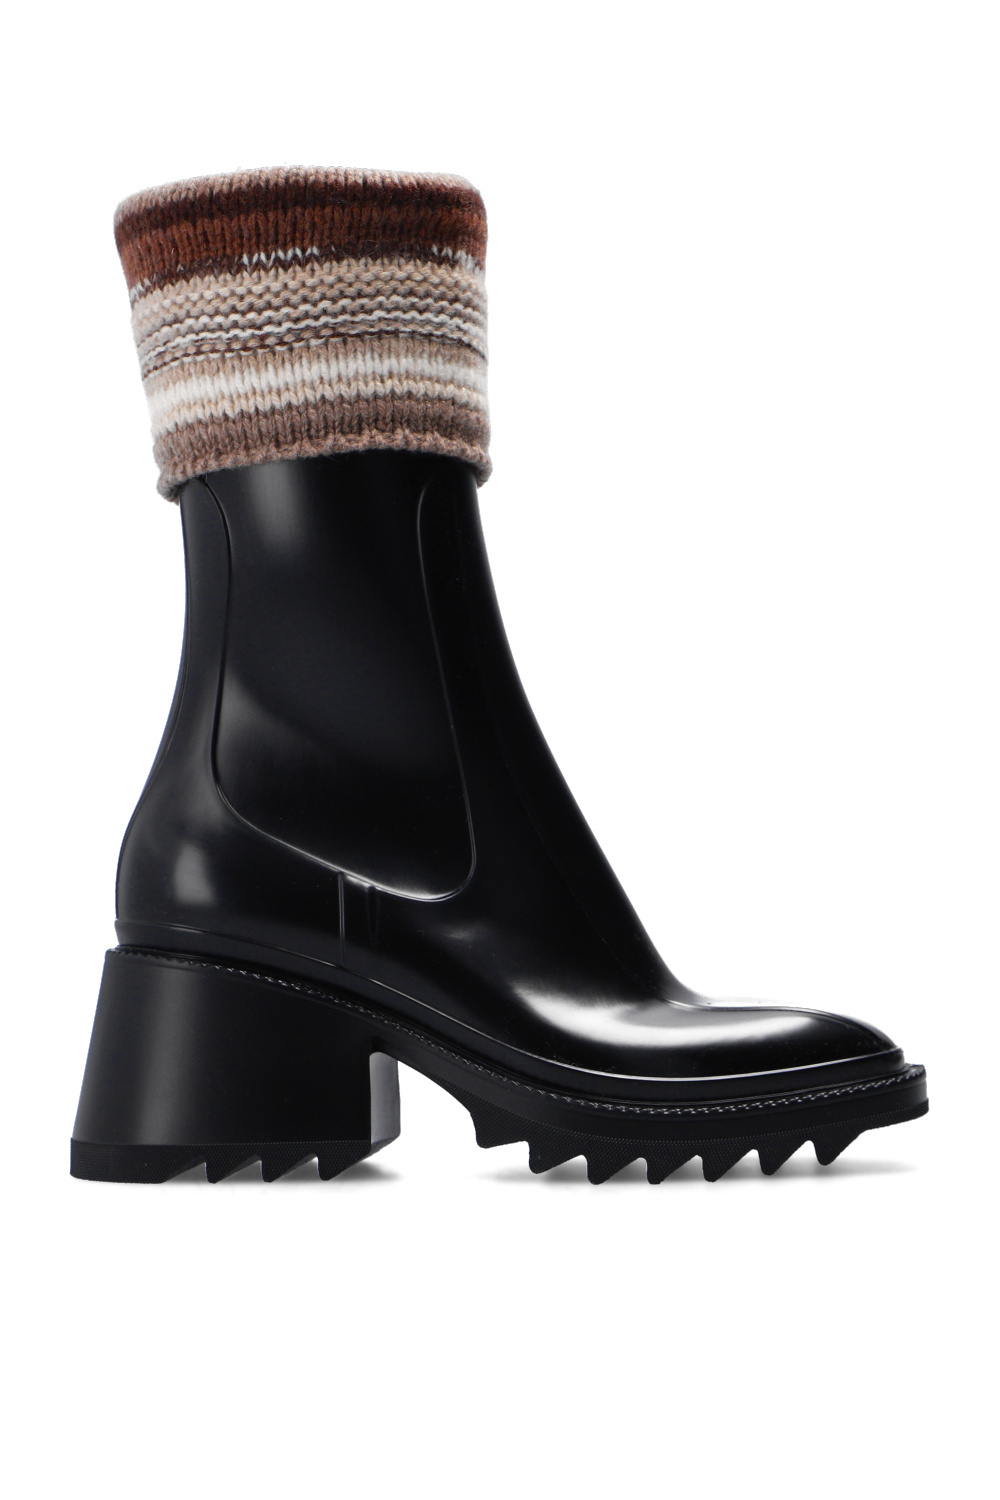 Chloé ‘Betty’ heeled ankle boots